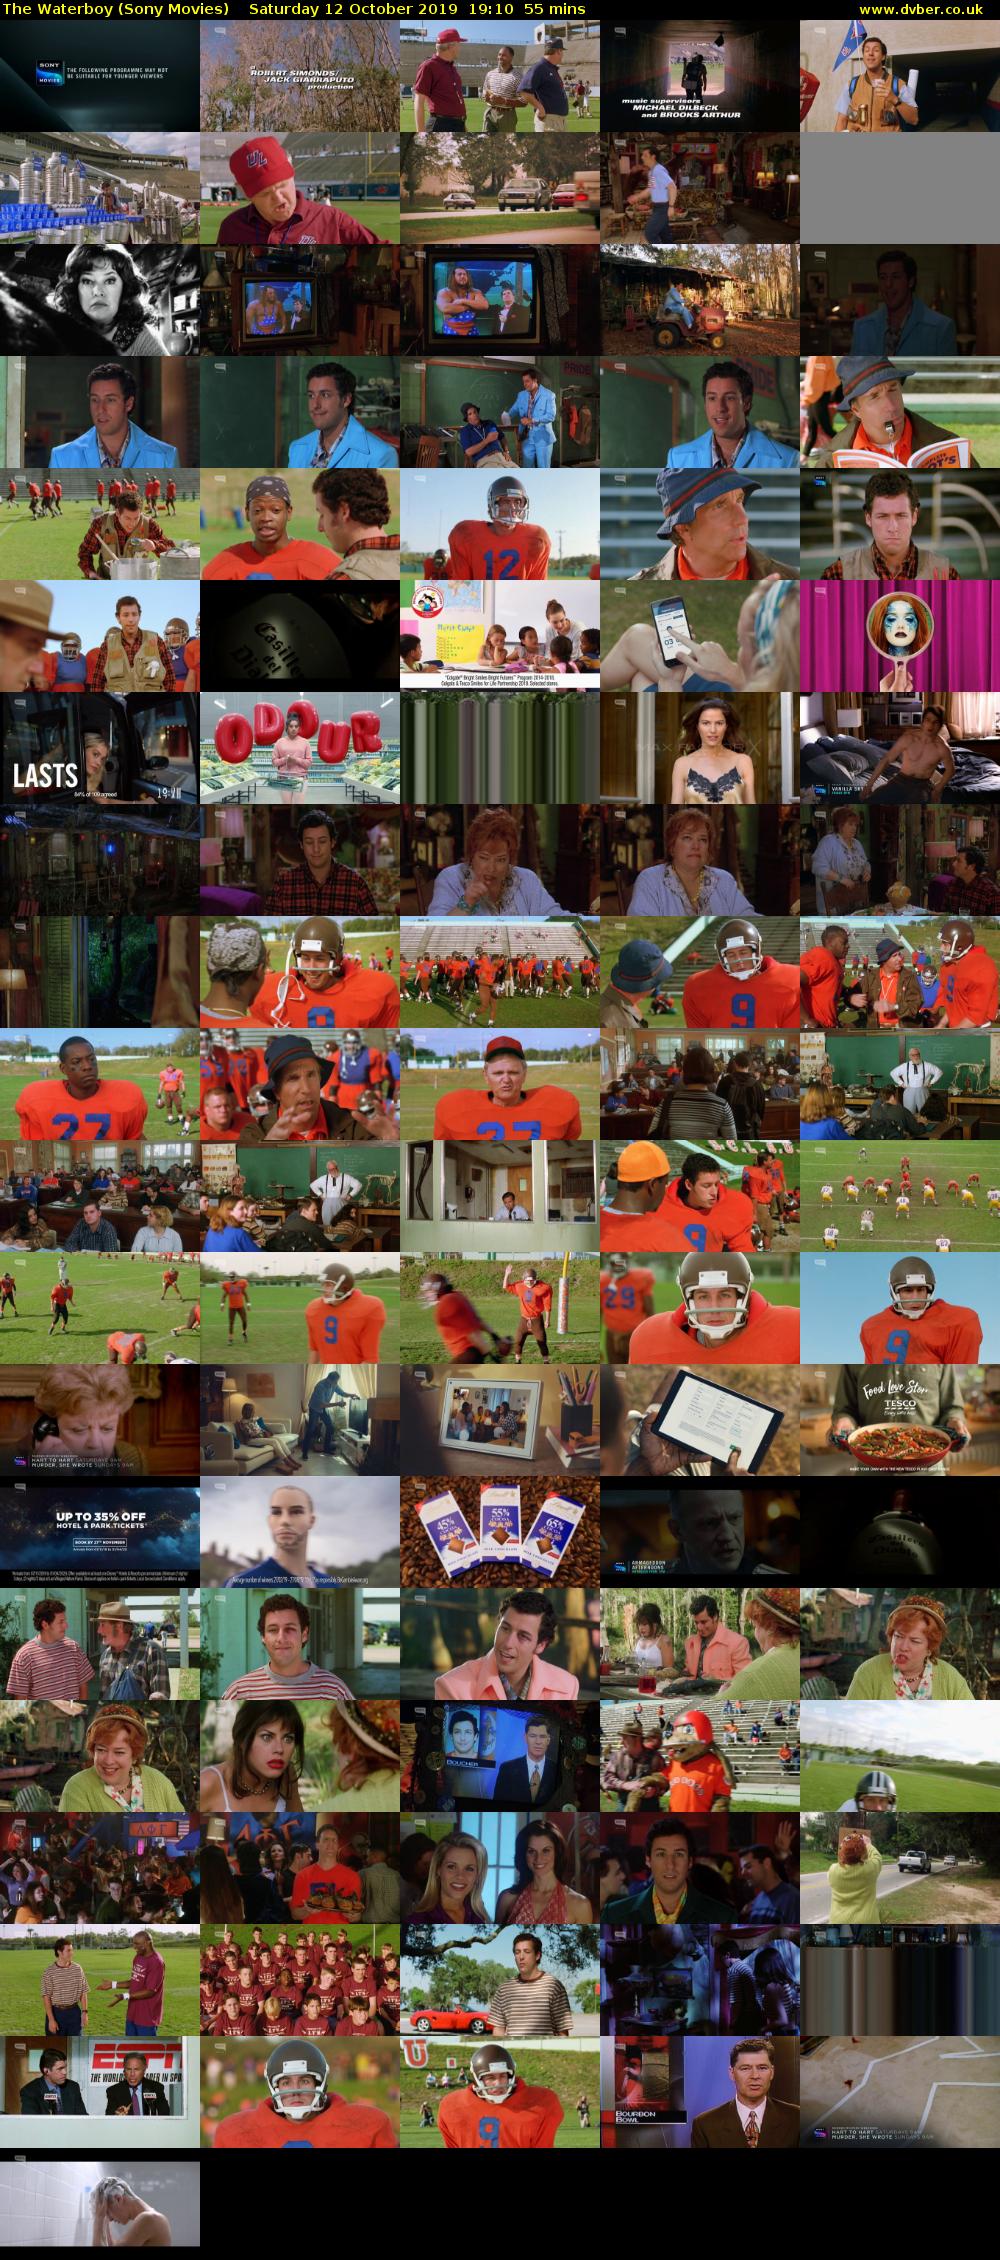 The Waterboy (Sony Movies) Saturday 12 October 2019 19:10 - 20:05